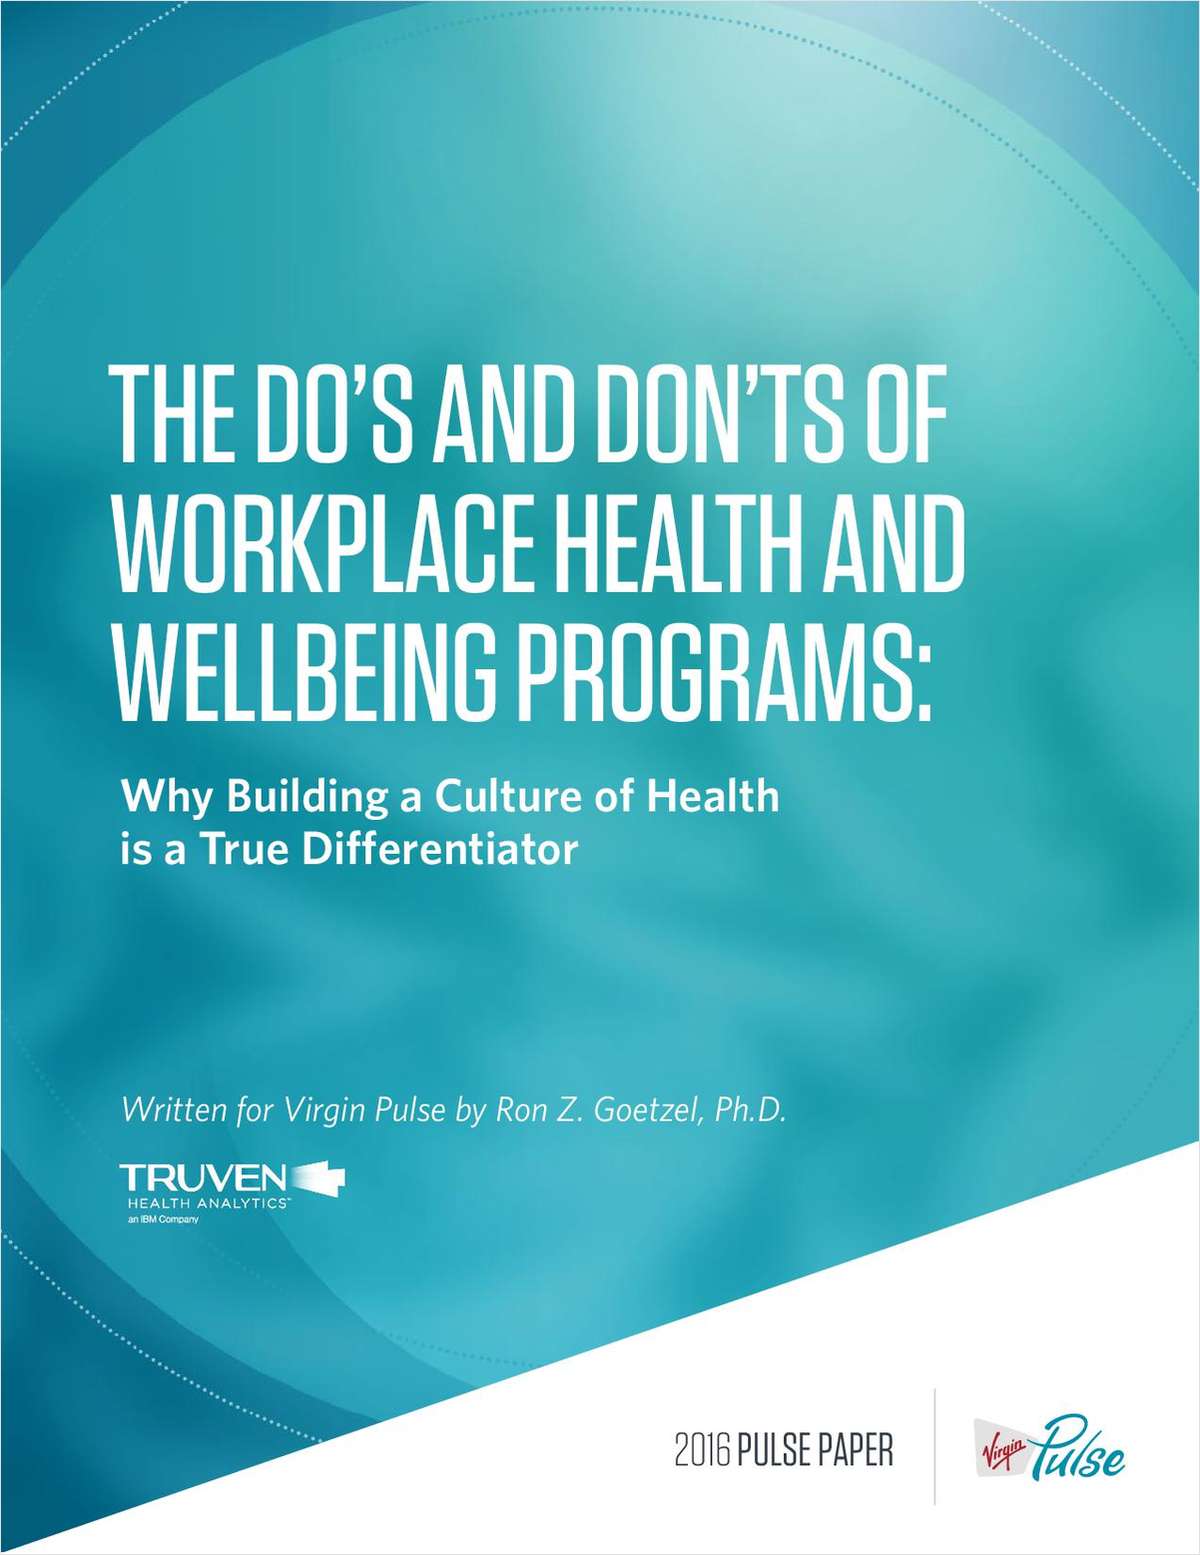 The Do's and Don'ts of Workplace Health and Wellbeing Programs